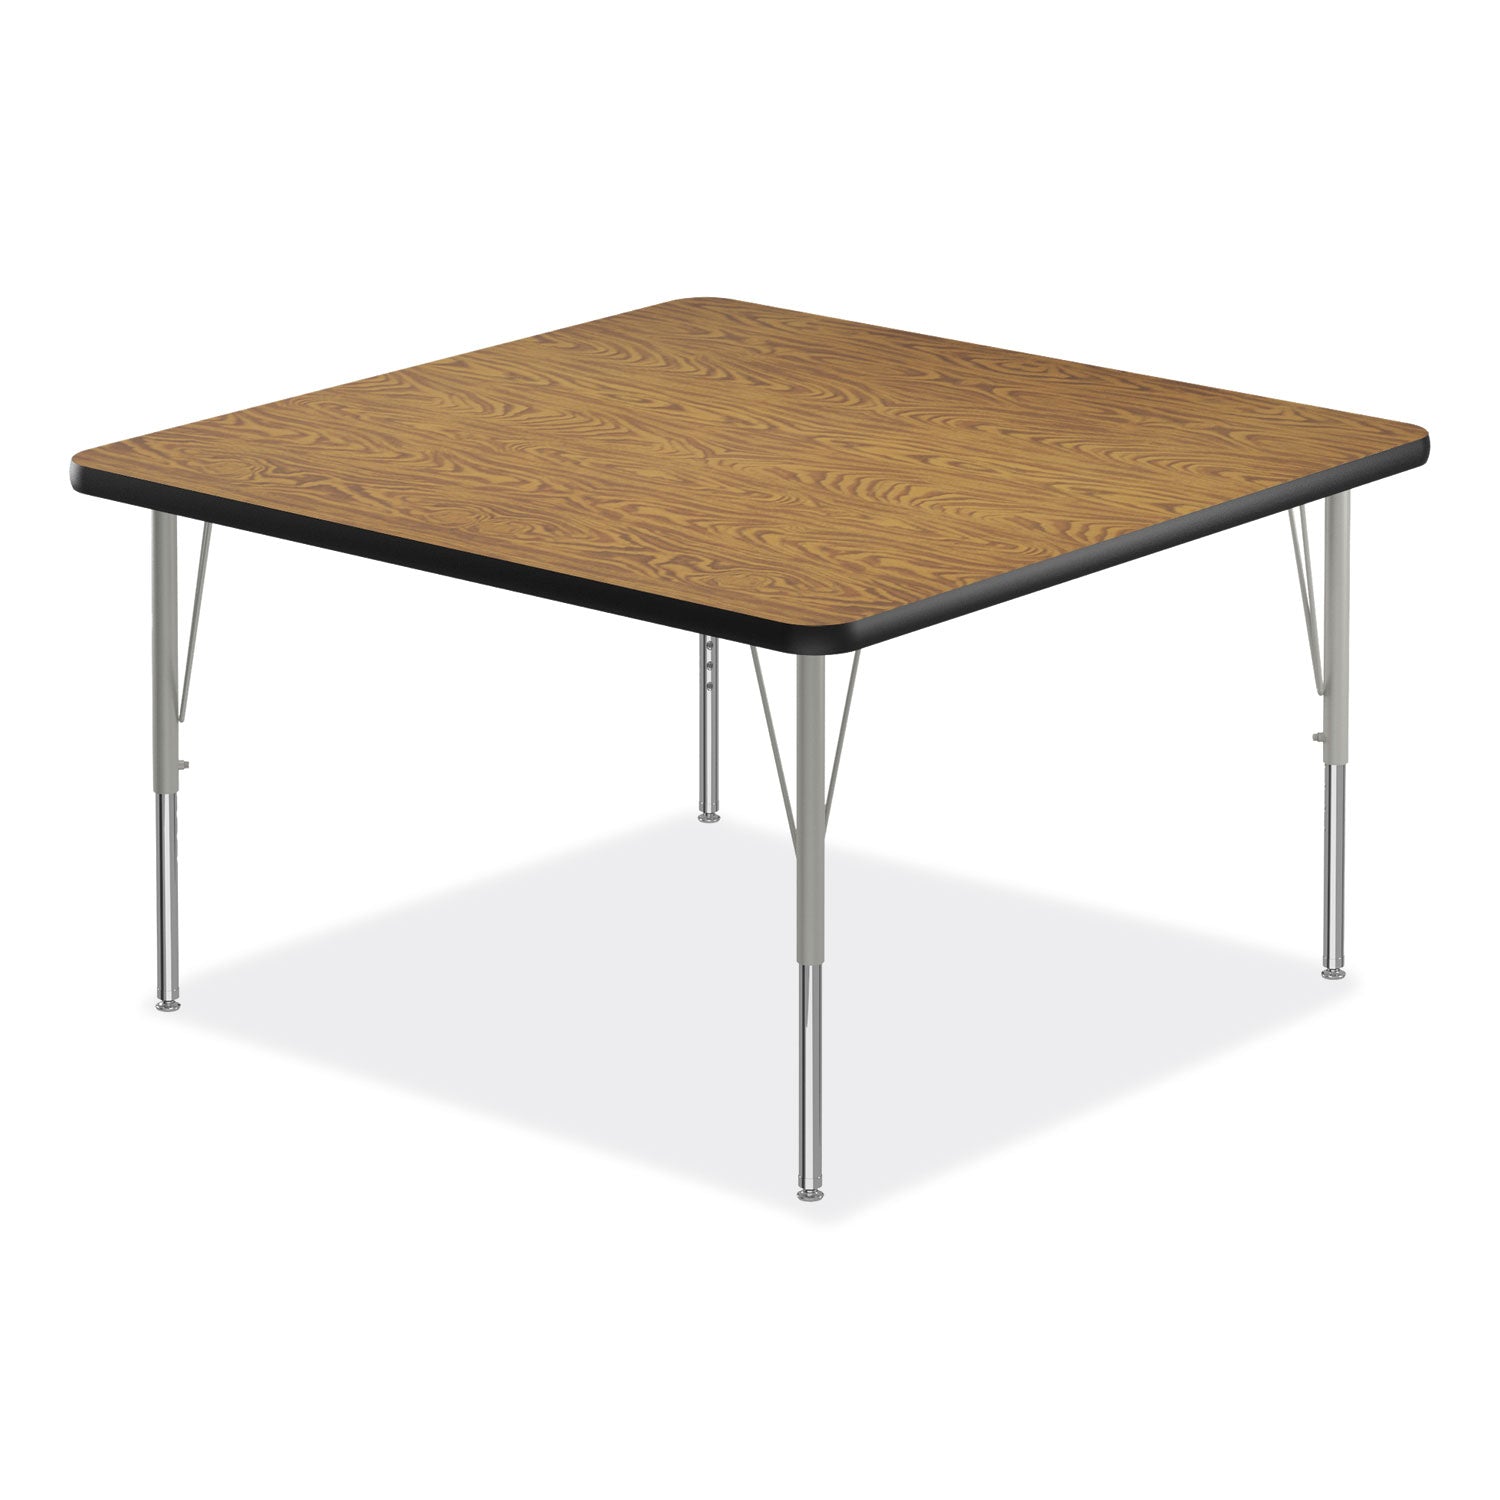 adjustable-activity-tables-square-48-x-48-x-19-to-29-medium-oak-top-silver-legs-4-pallet-ships-in-4-6-business-days_crl4848tf06954p - 6